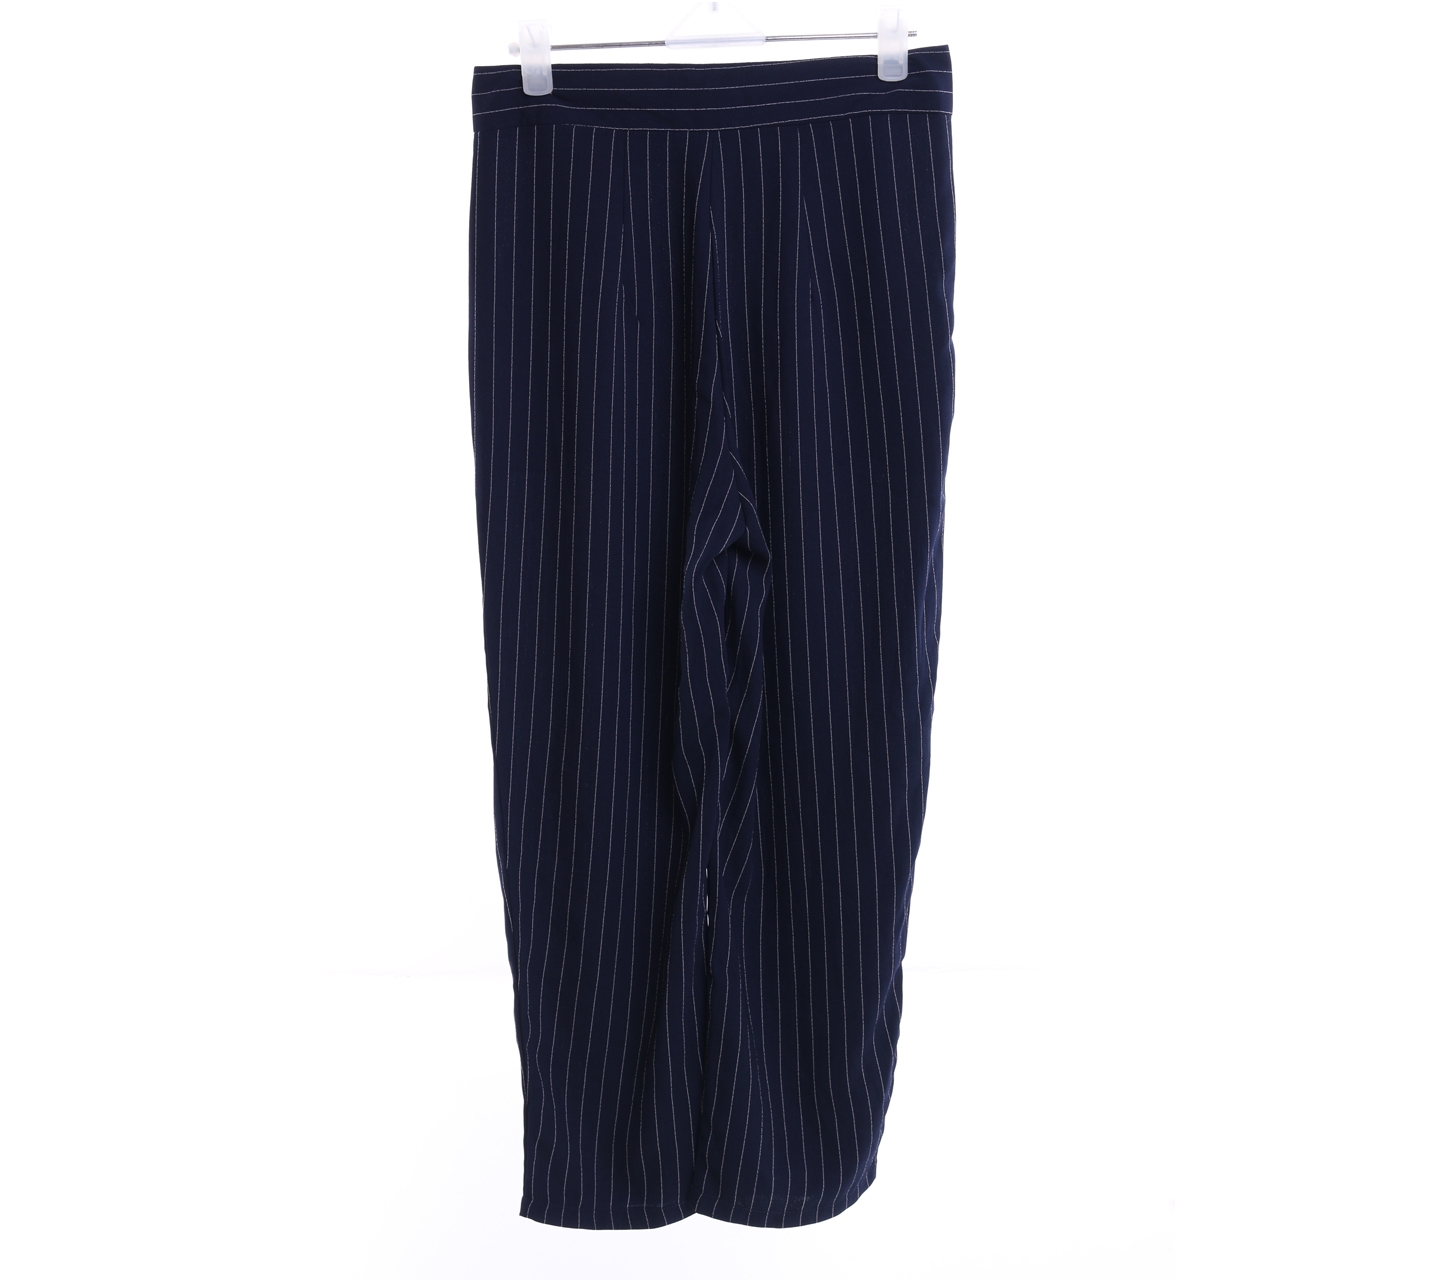 Bel.Corpo Dark Blue And White Striped Long Pants